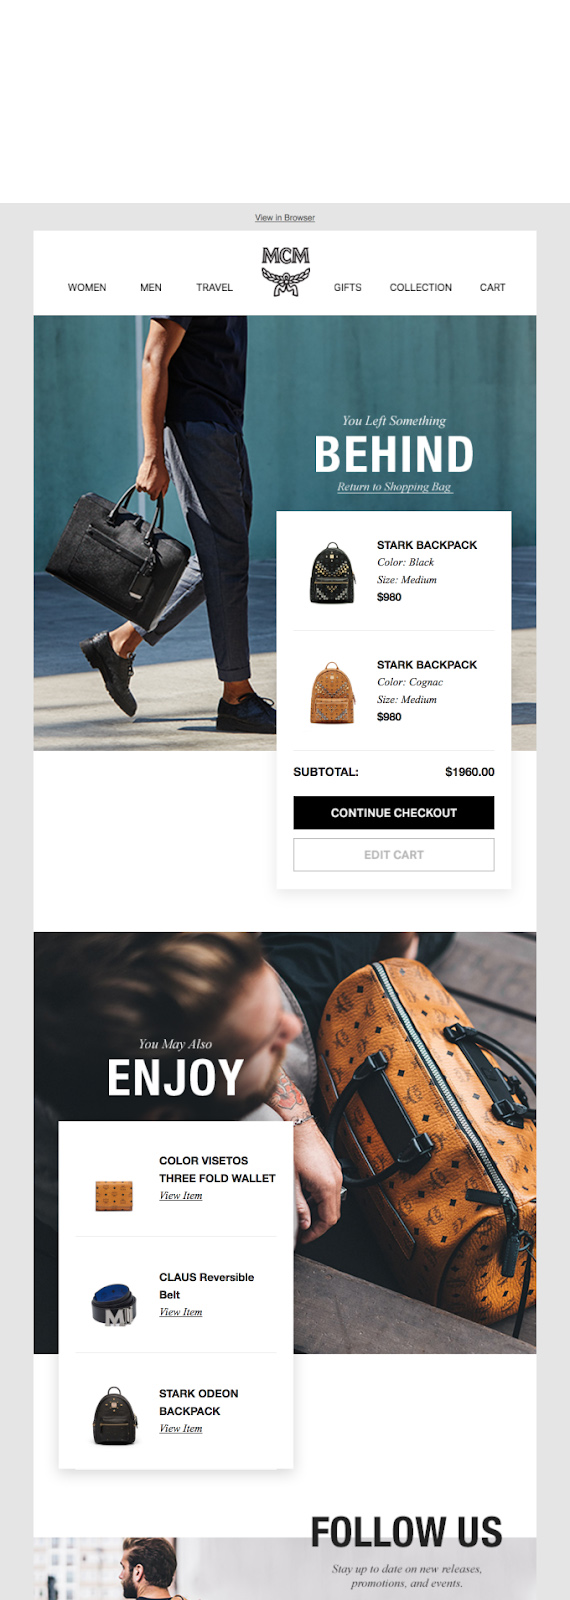 MCM homepage and featured products.